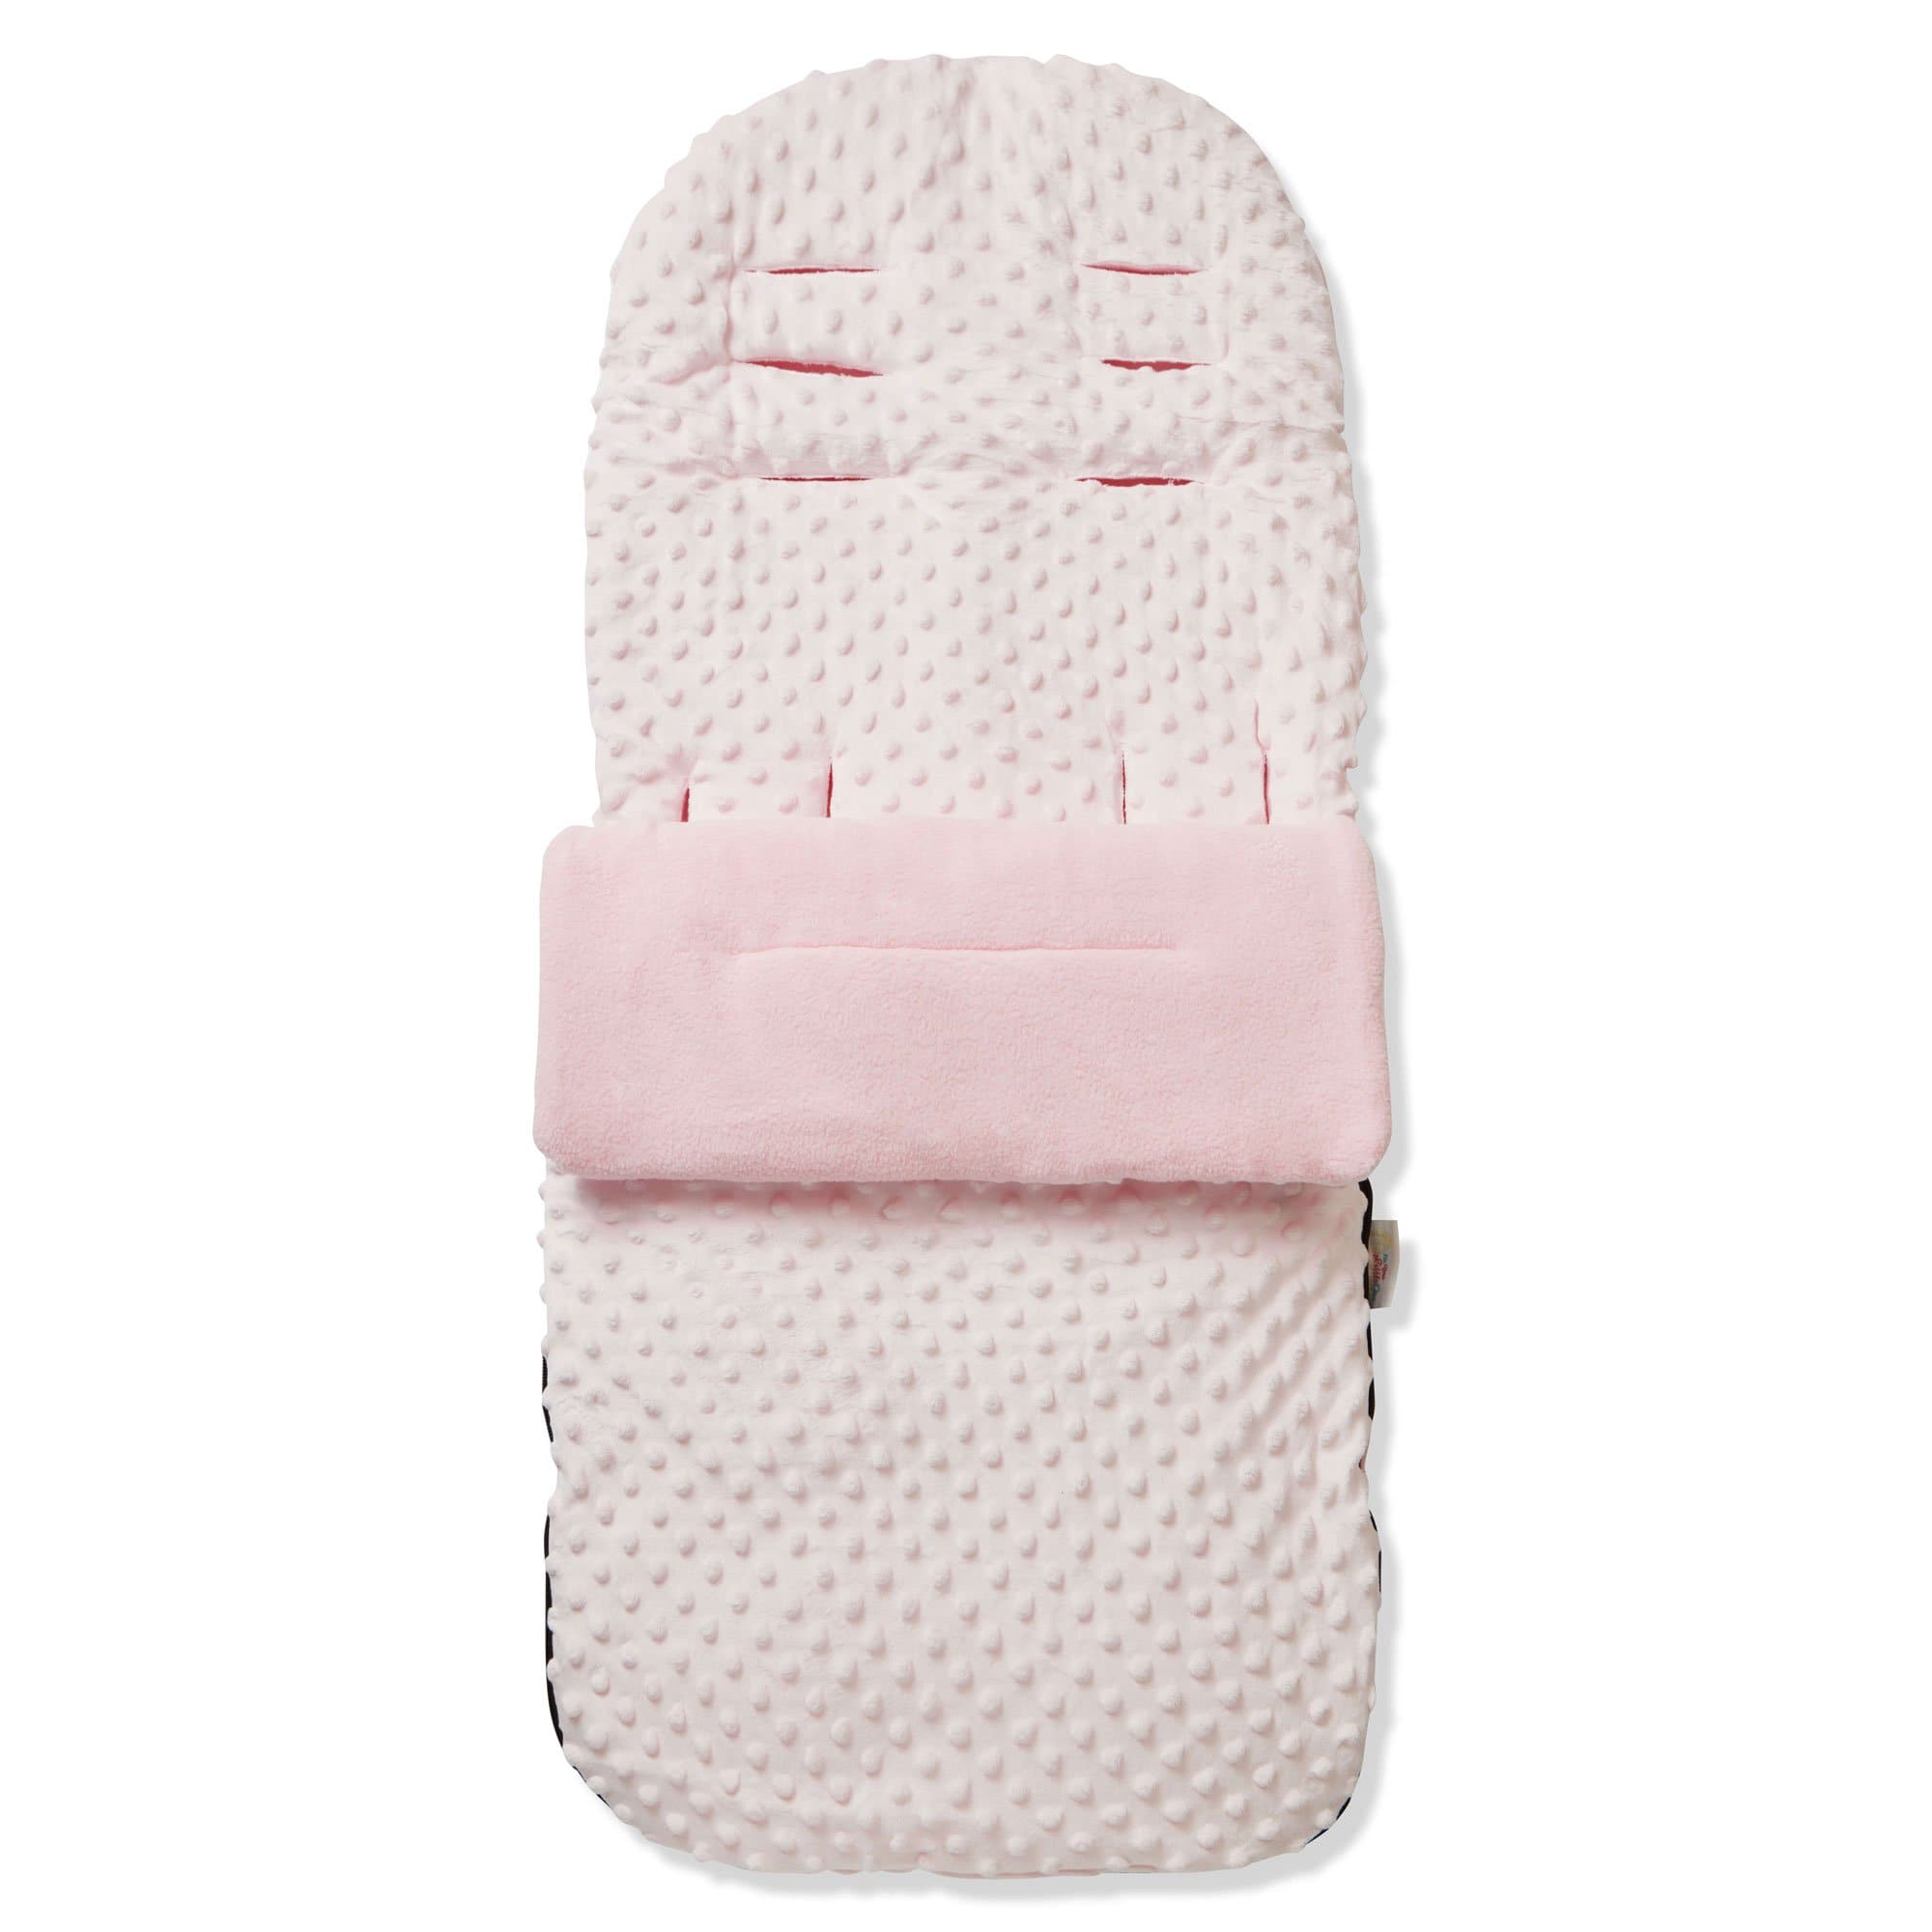 Dimple Footmuff / Cosy Toes Compatible with Phil & Teds - Pink / Fits All Models | For Your Little One